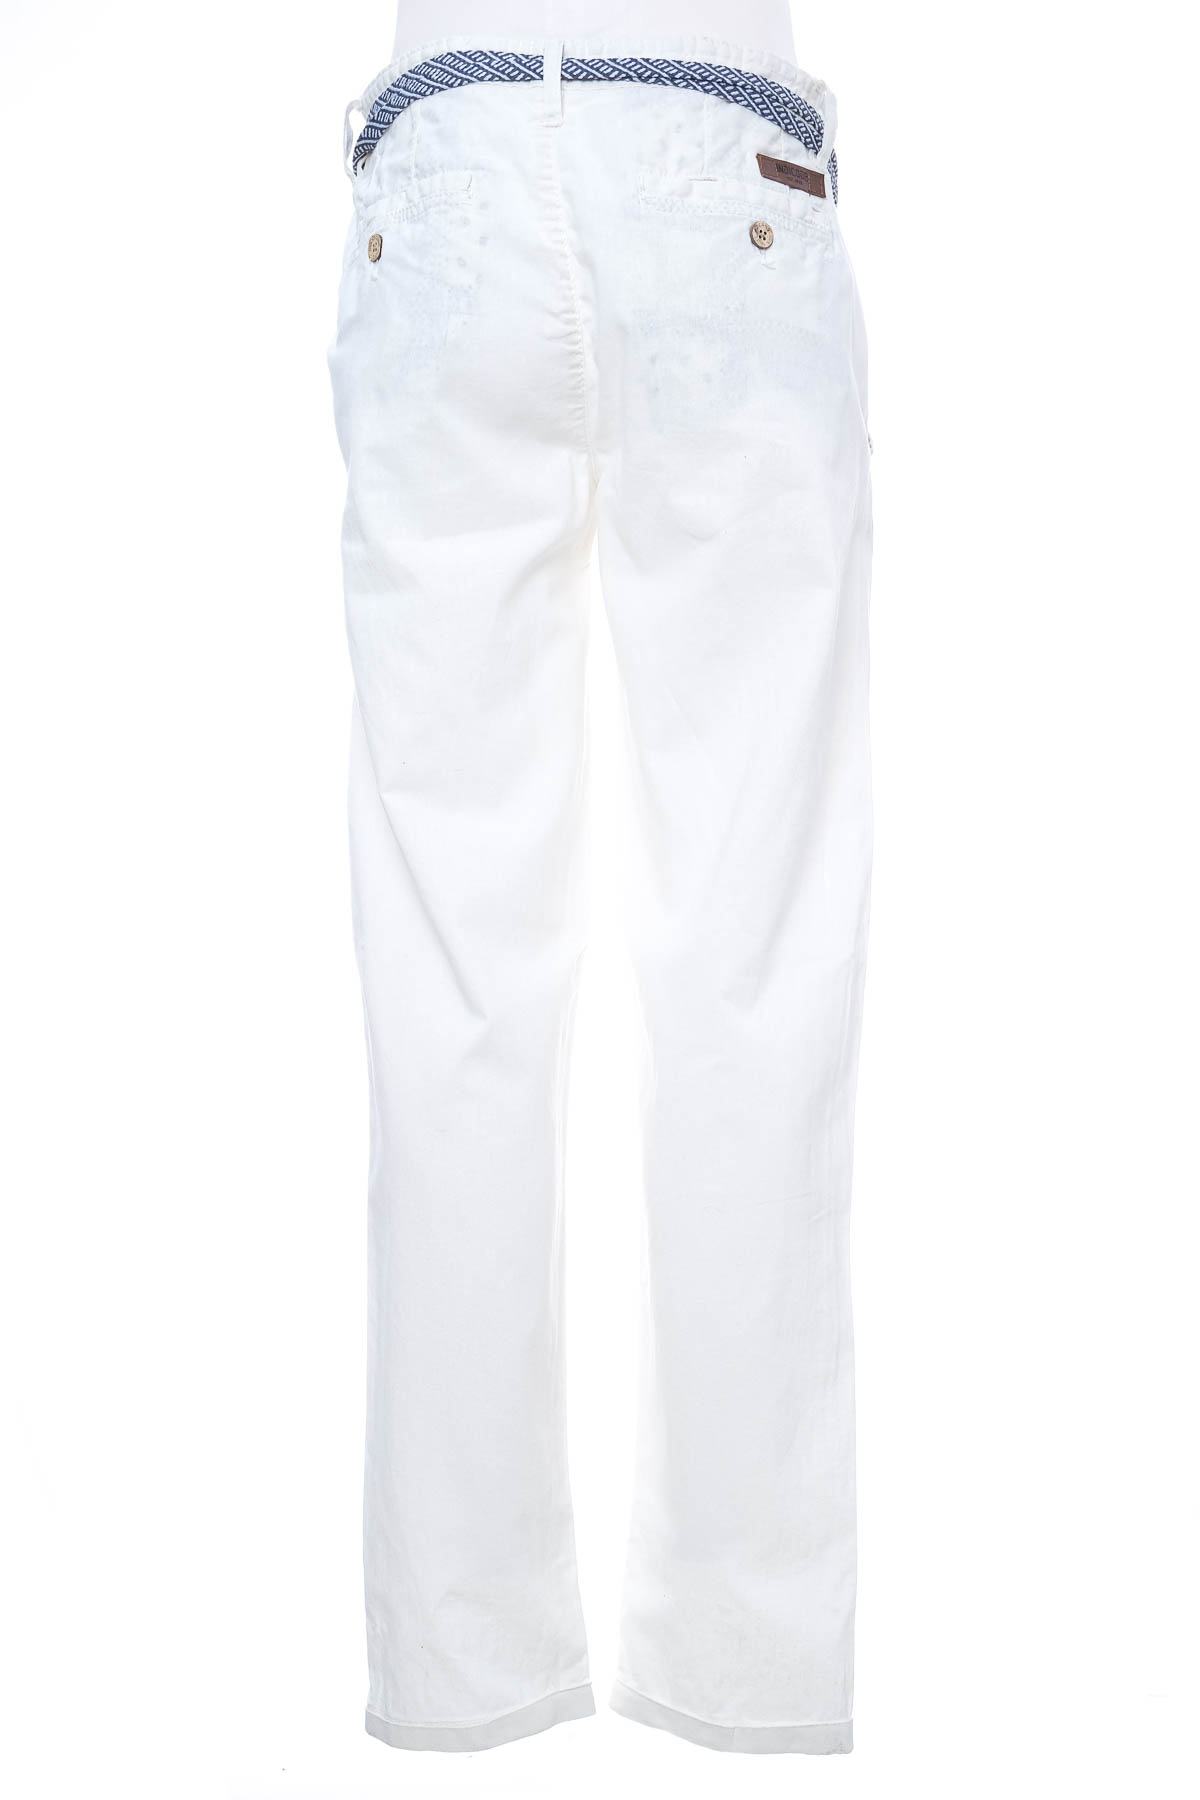 Men's trousers - INDICODE JEANS - 1